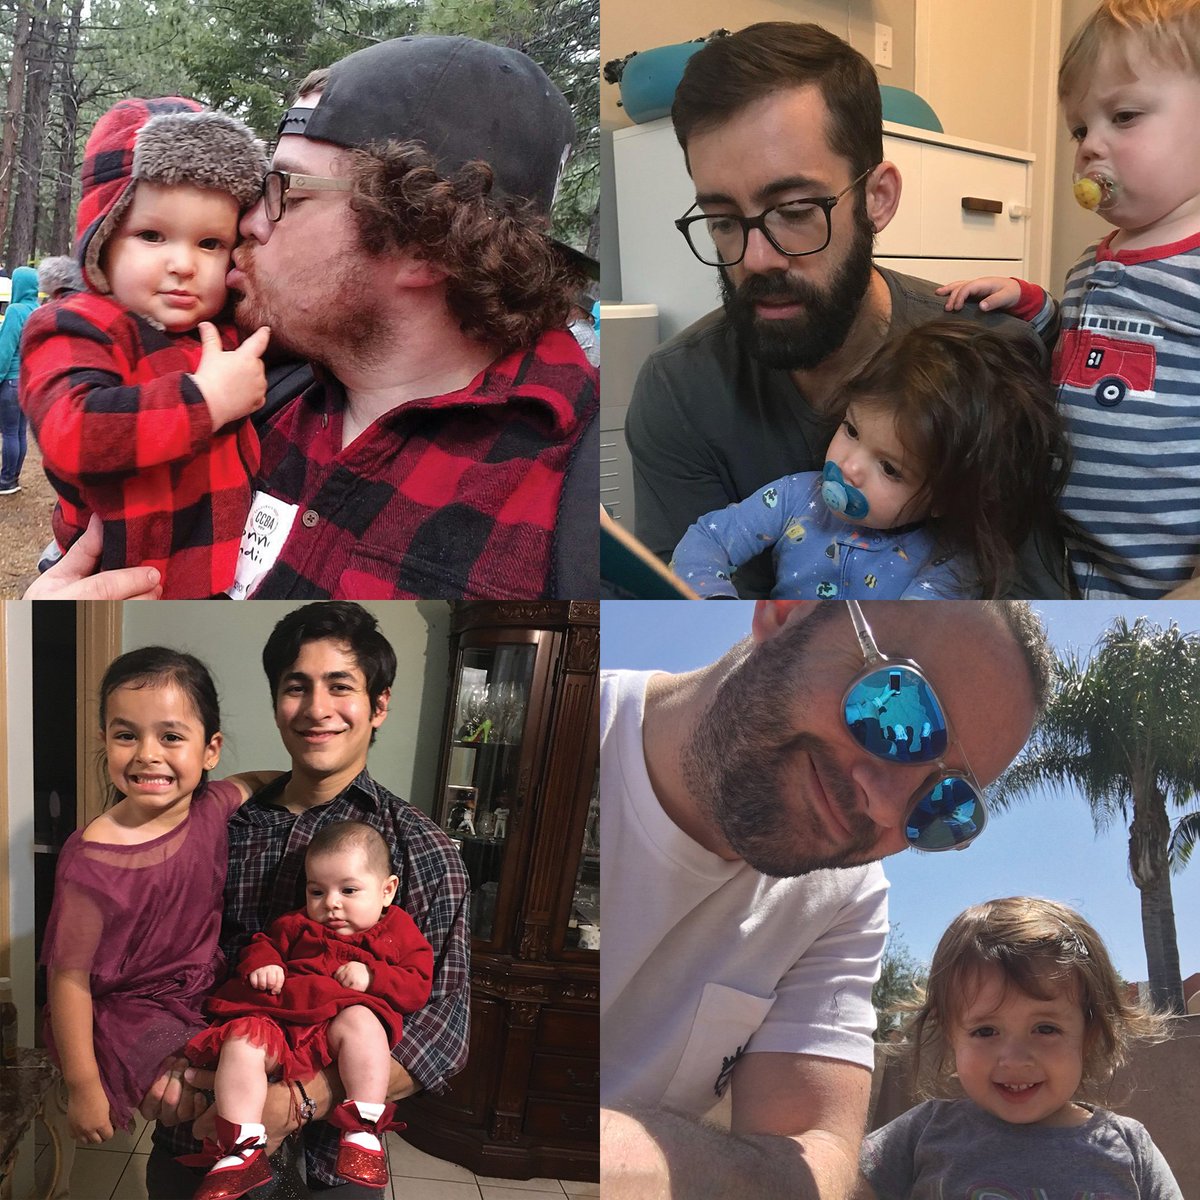 Happy Father's Day from all the dads at Indie! We are open normal Sunday hours, 12-7pm. Swing through because we all know that what dad really wants is beer.... #HappyFathersDay #LAbeer #IndieBeer